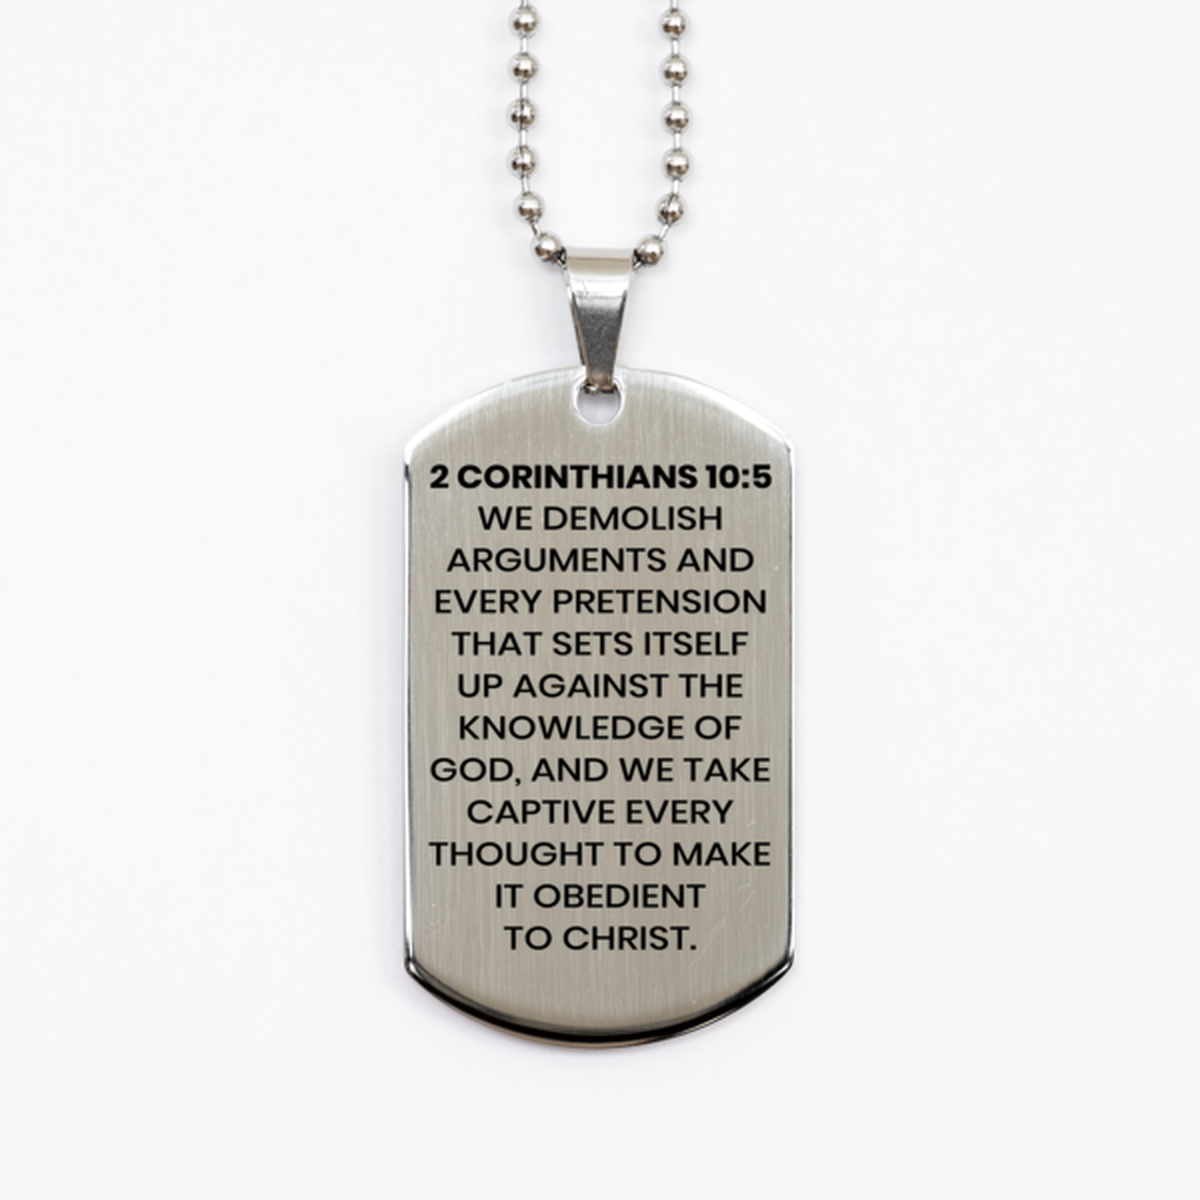 2 Corinthians 10:5 Necklace, Bible Verse Necklace, Christian Necklace, Christian Birthday Gift, Stainless Steel Dog Tag Necklace, Gift for Christian.